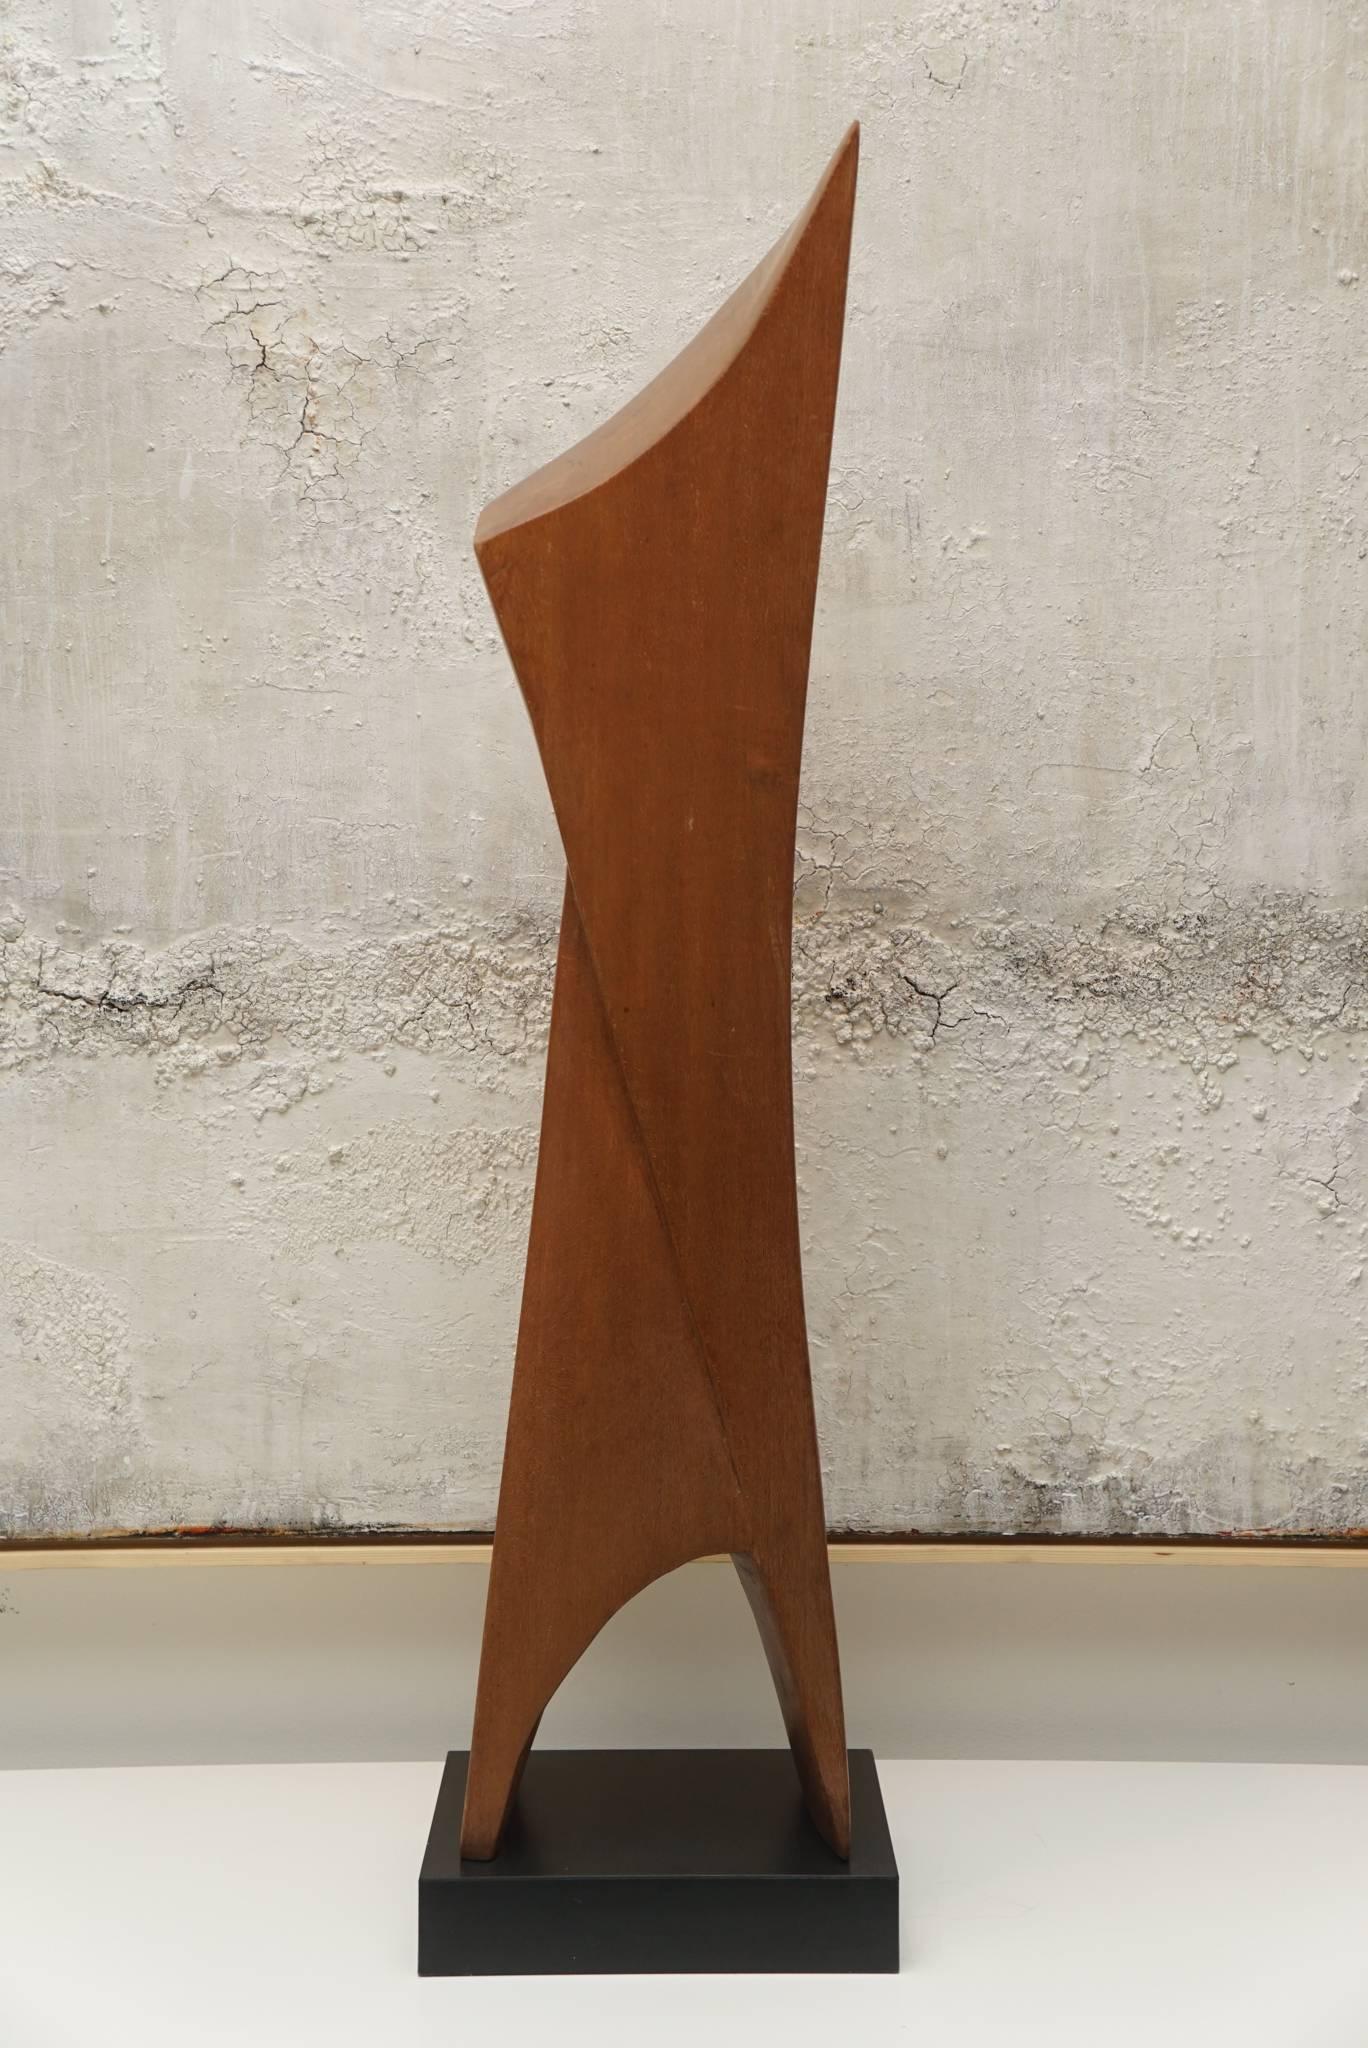 1970s modernist wooden sculpture by W.P. Katz.
Signed by the artist.